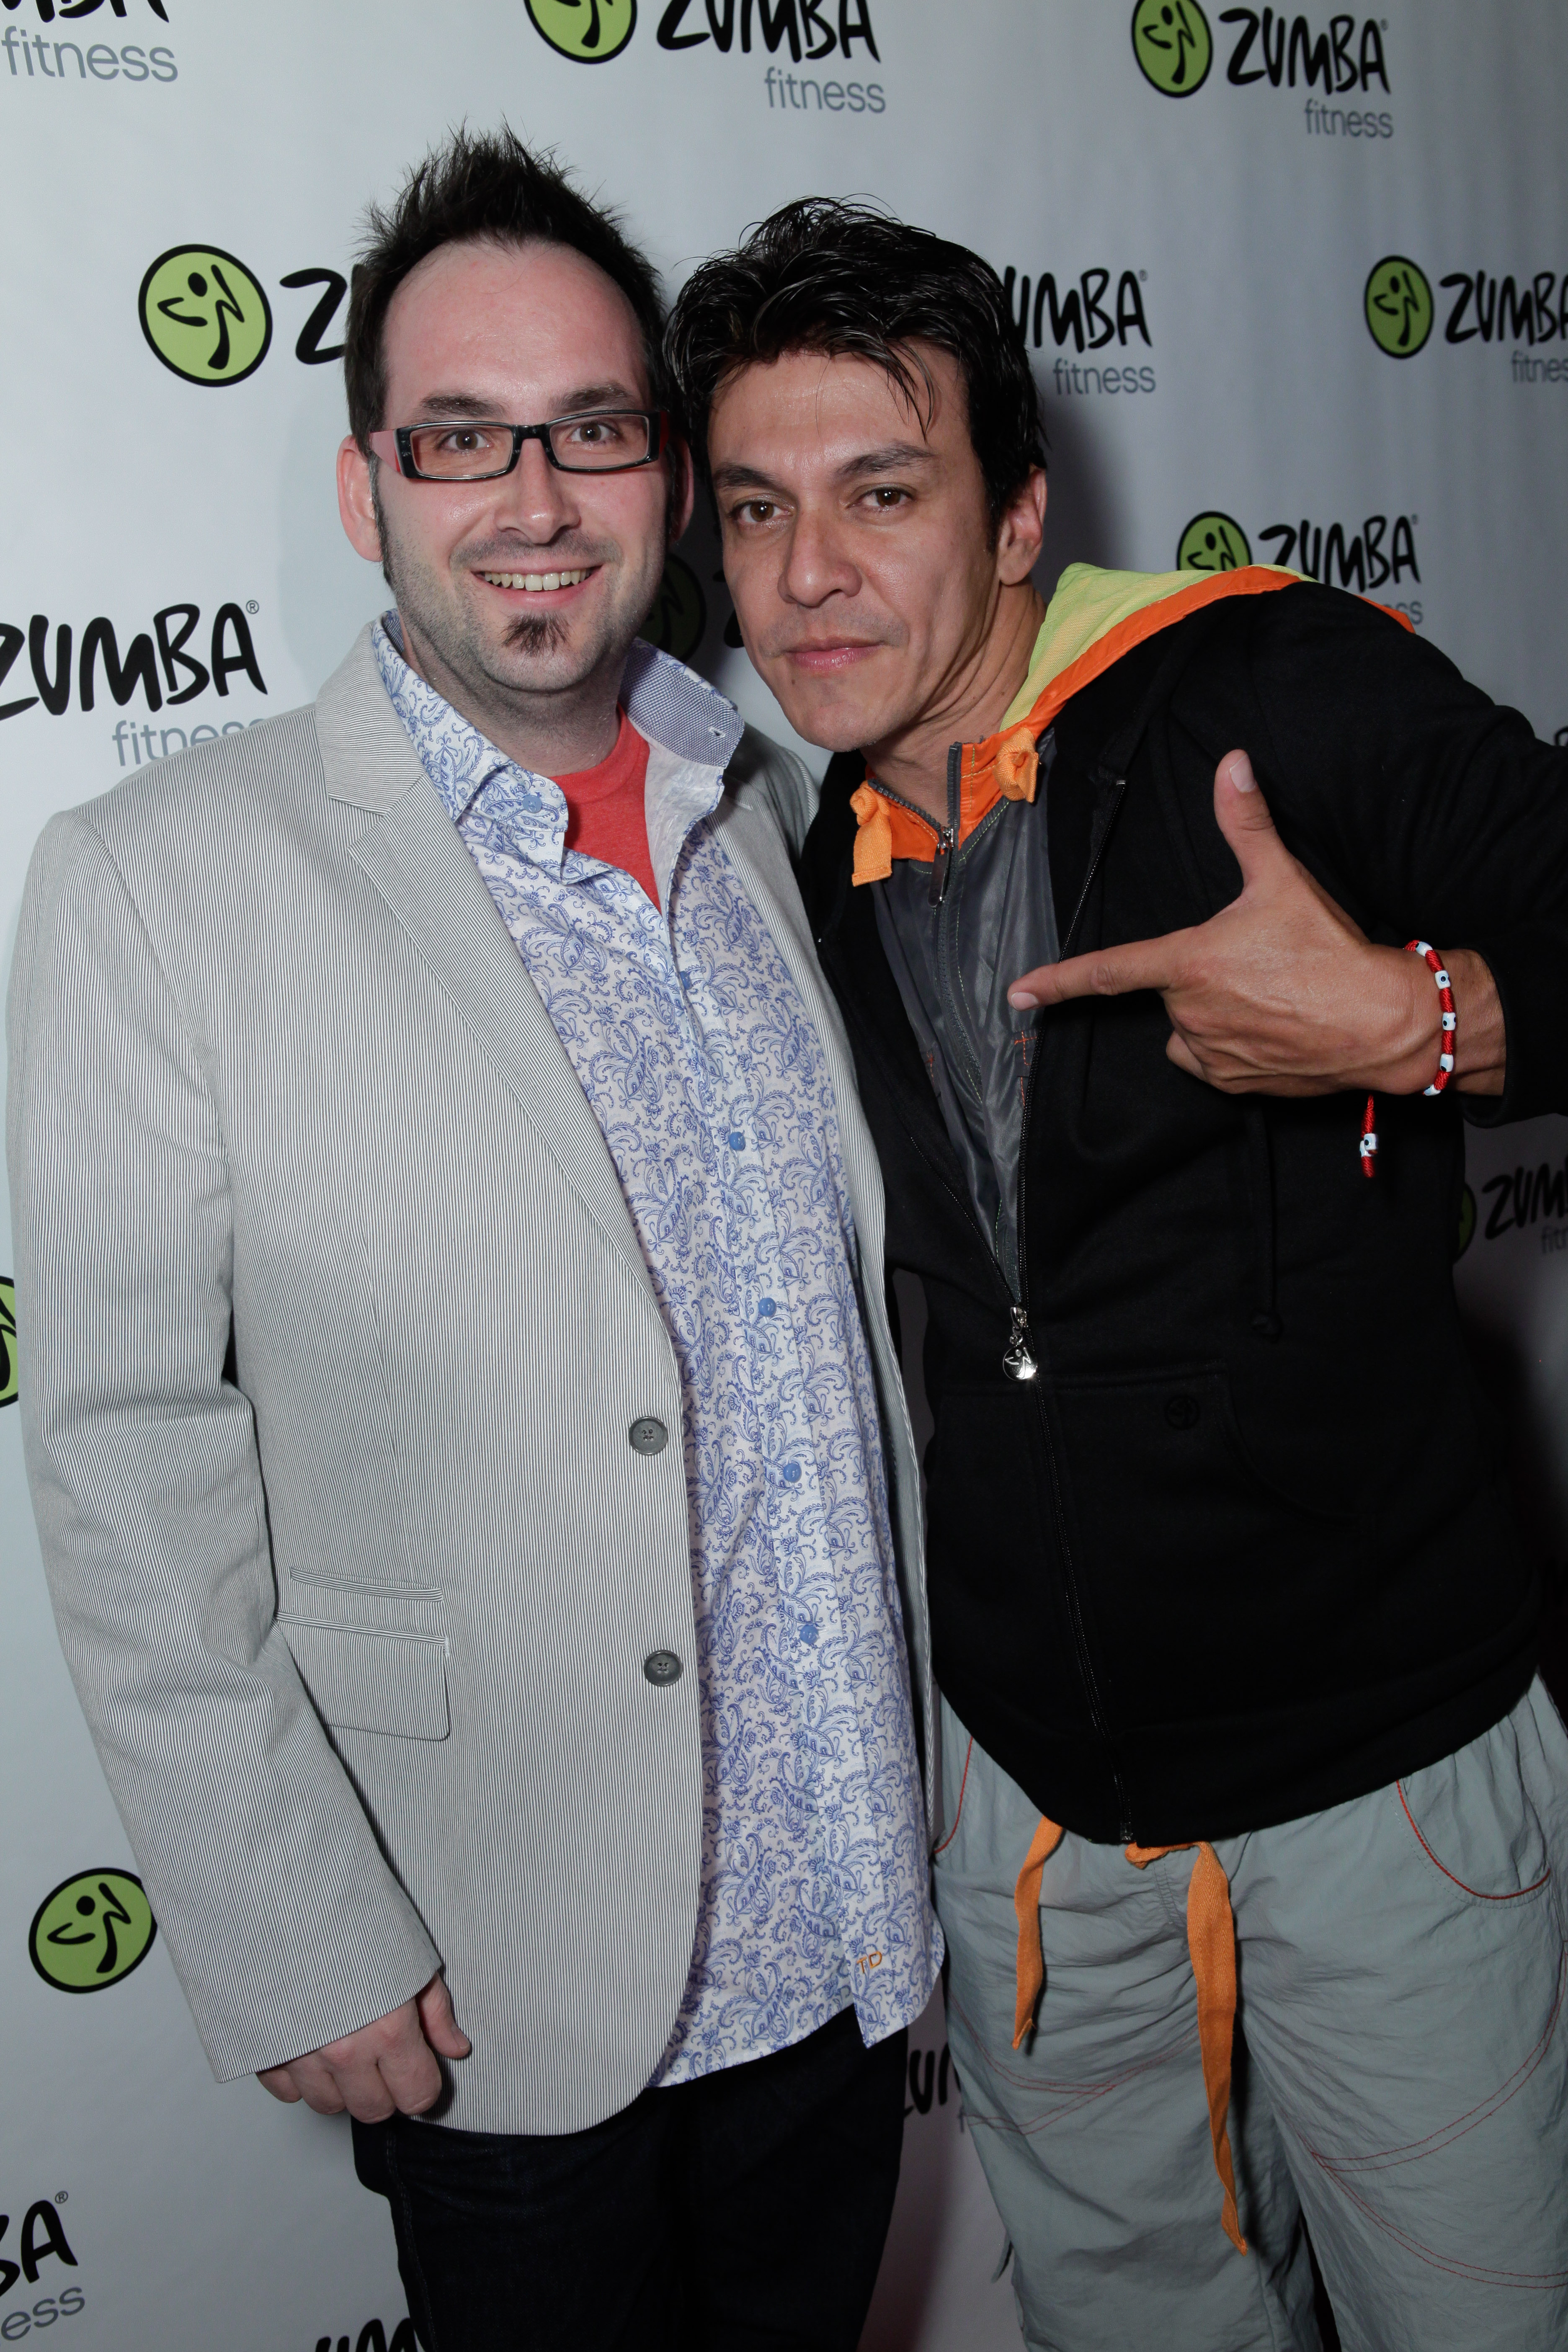 Paul Morrell & Beto Perez - Zumba Fitness® Exhilarate DVD Release Party 3/24/11